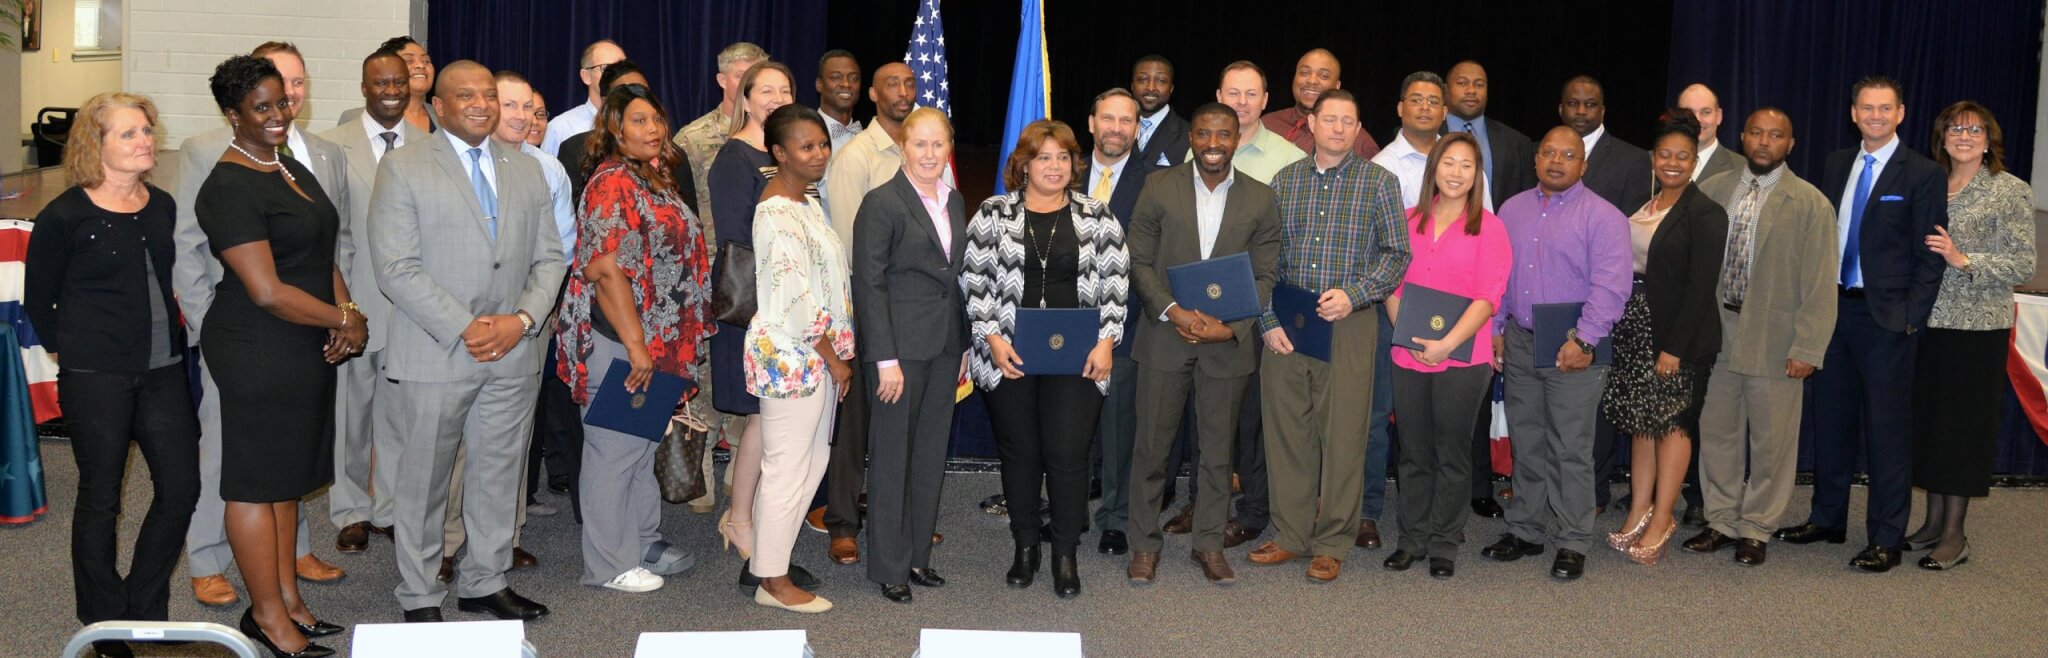 The graduates of the Onward to Opportunity Program and others gather for a group photo at the Joint Base San Antonio-Fort Sam Houston Military & Family Readiness Center Jan. 17. Photo by Steve Elliott